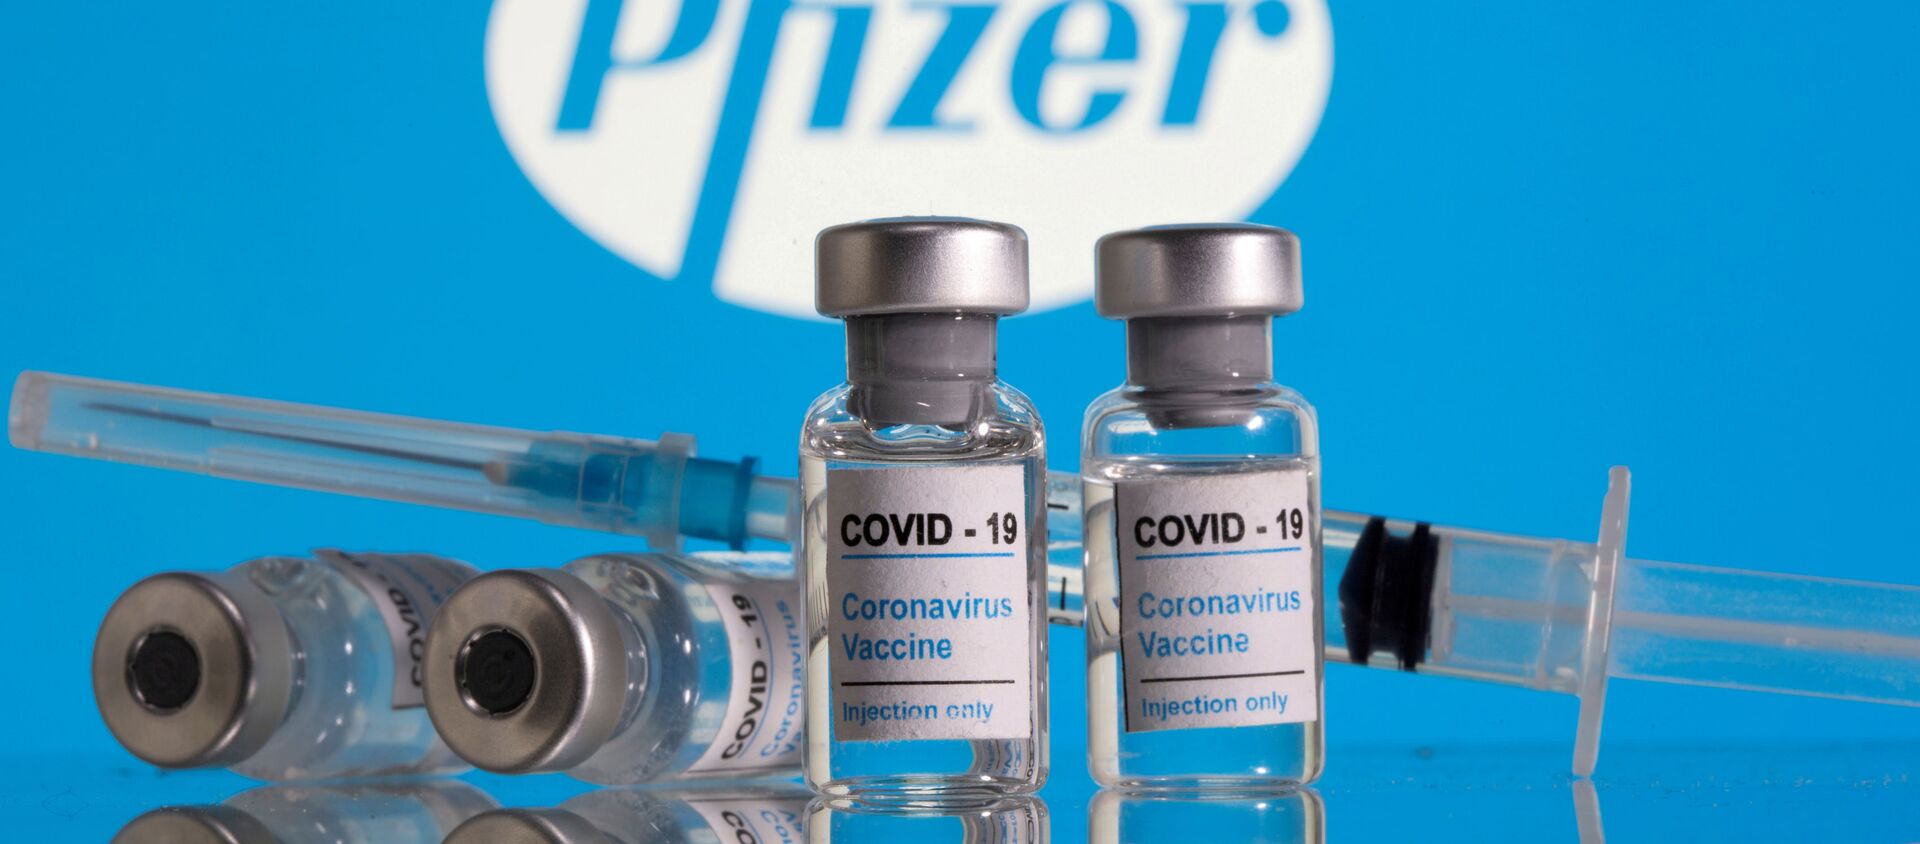 Vials labelled COVID-19 Coronavirus Vaccine and a syringe are seen in front of the Pfizer logo in this illustration taken February 9, 2021 - Sputnik International, 1920, 24.05.2021